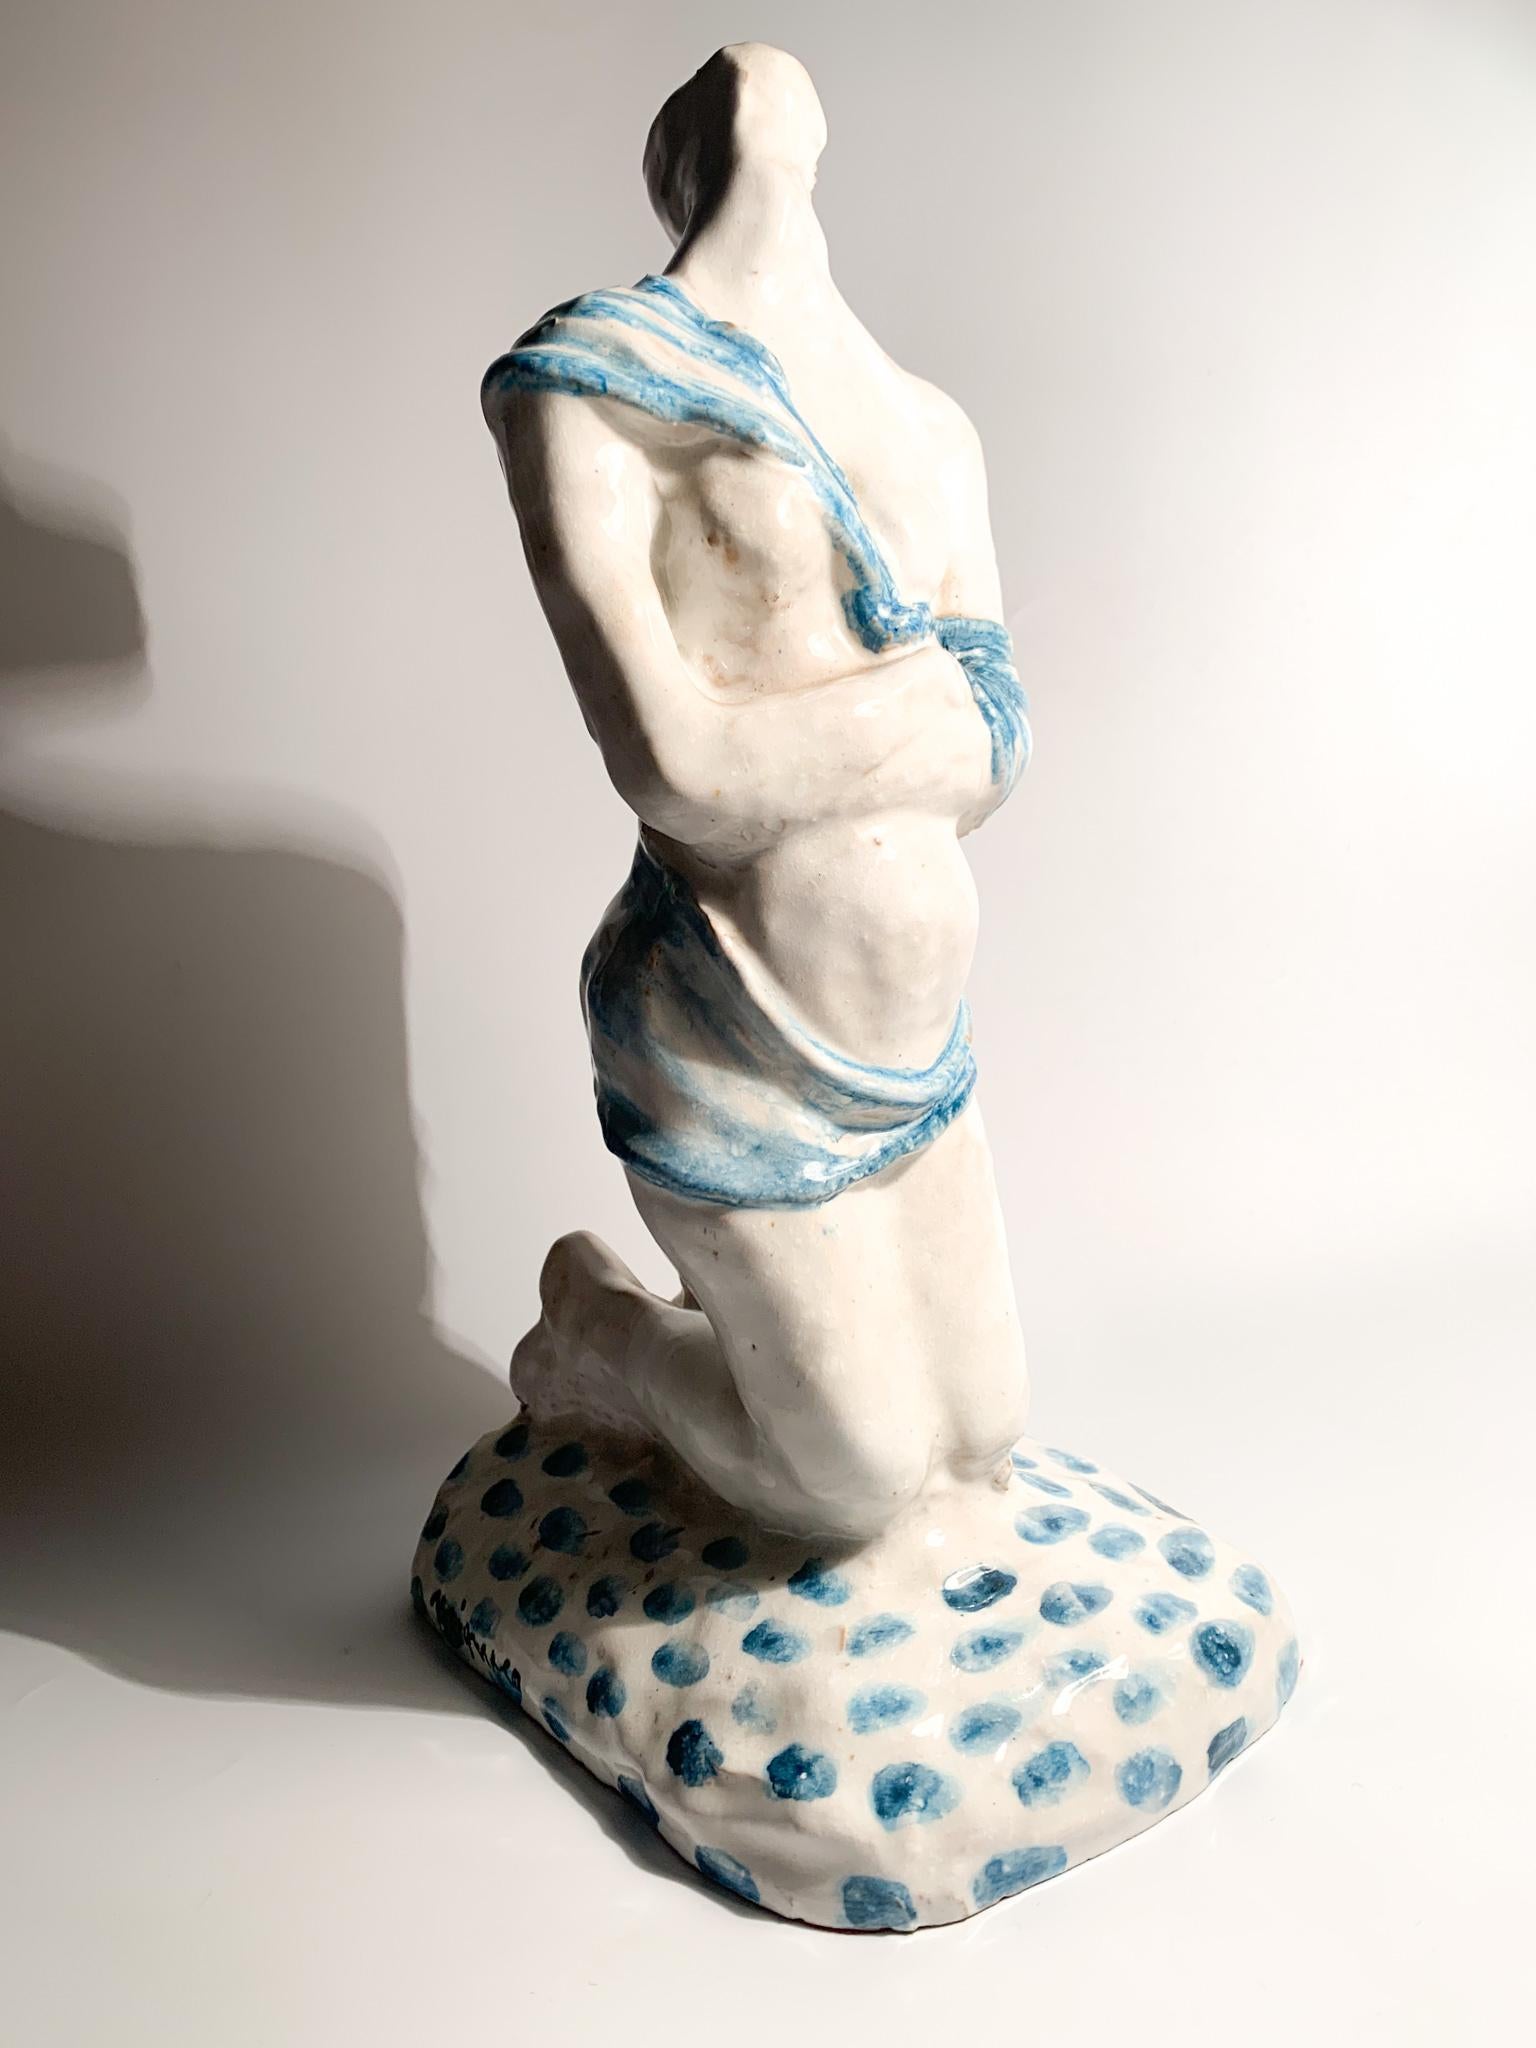 Ceramic sculpture by Giuseppe Migneco, depicting Maternity and made in the 1960s

Measures: Ø cm 18 Ø cm 12 h cm 32

Giuseppe Migneco was born in Messina in 1903, and moved to Milan in 1931 to undertake medical studies. 

During his studies he